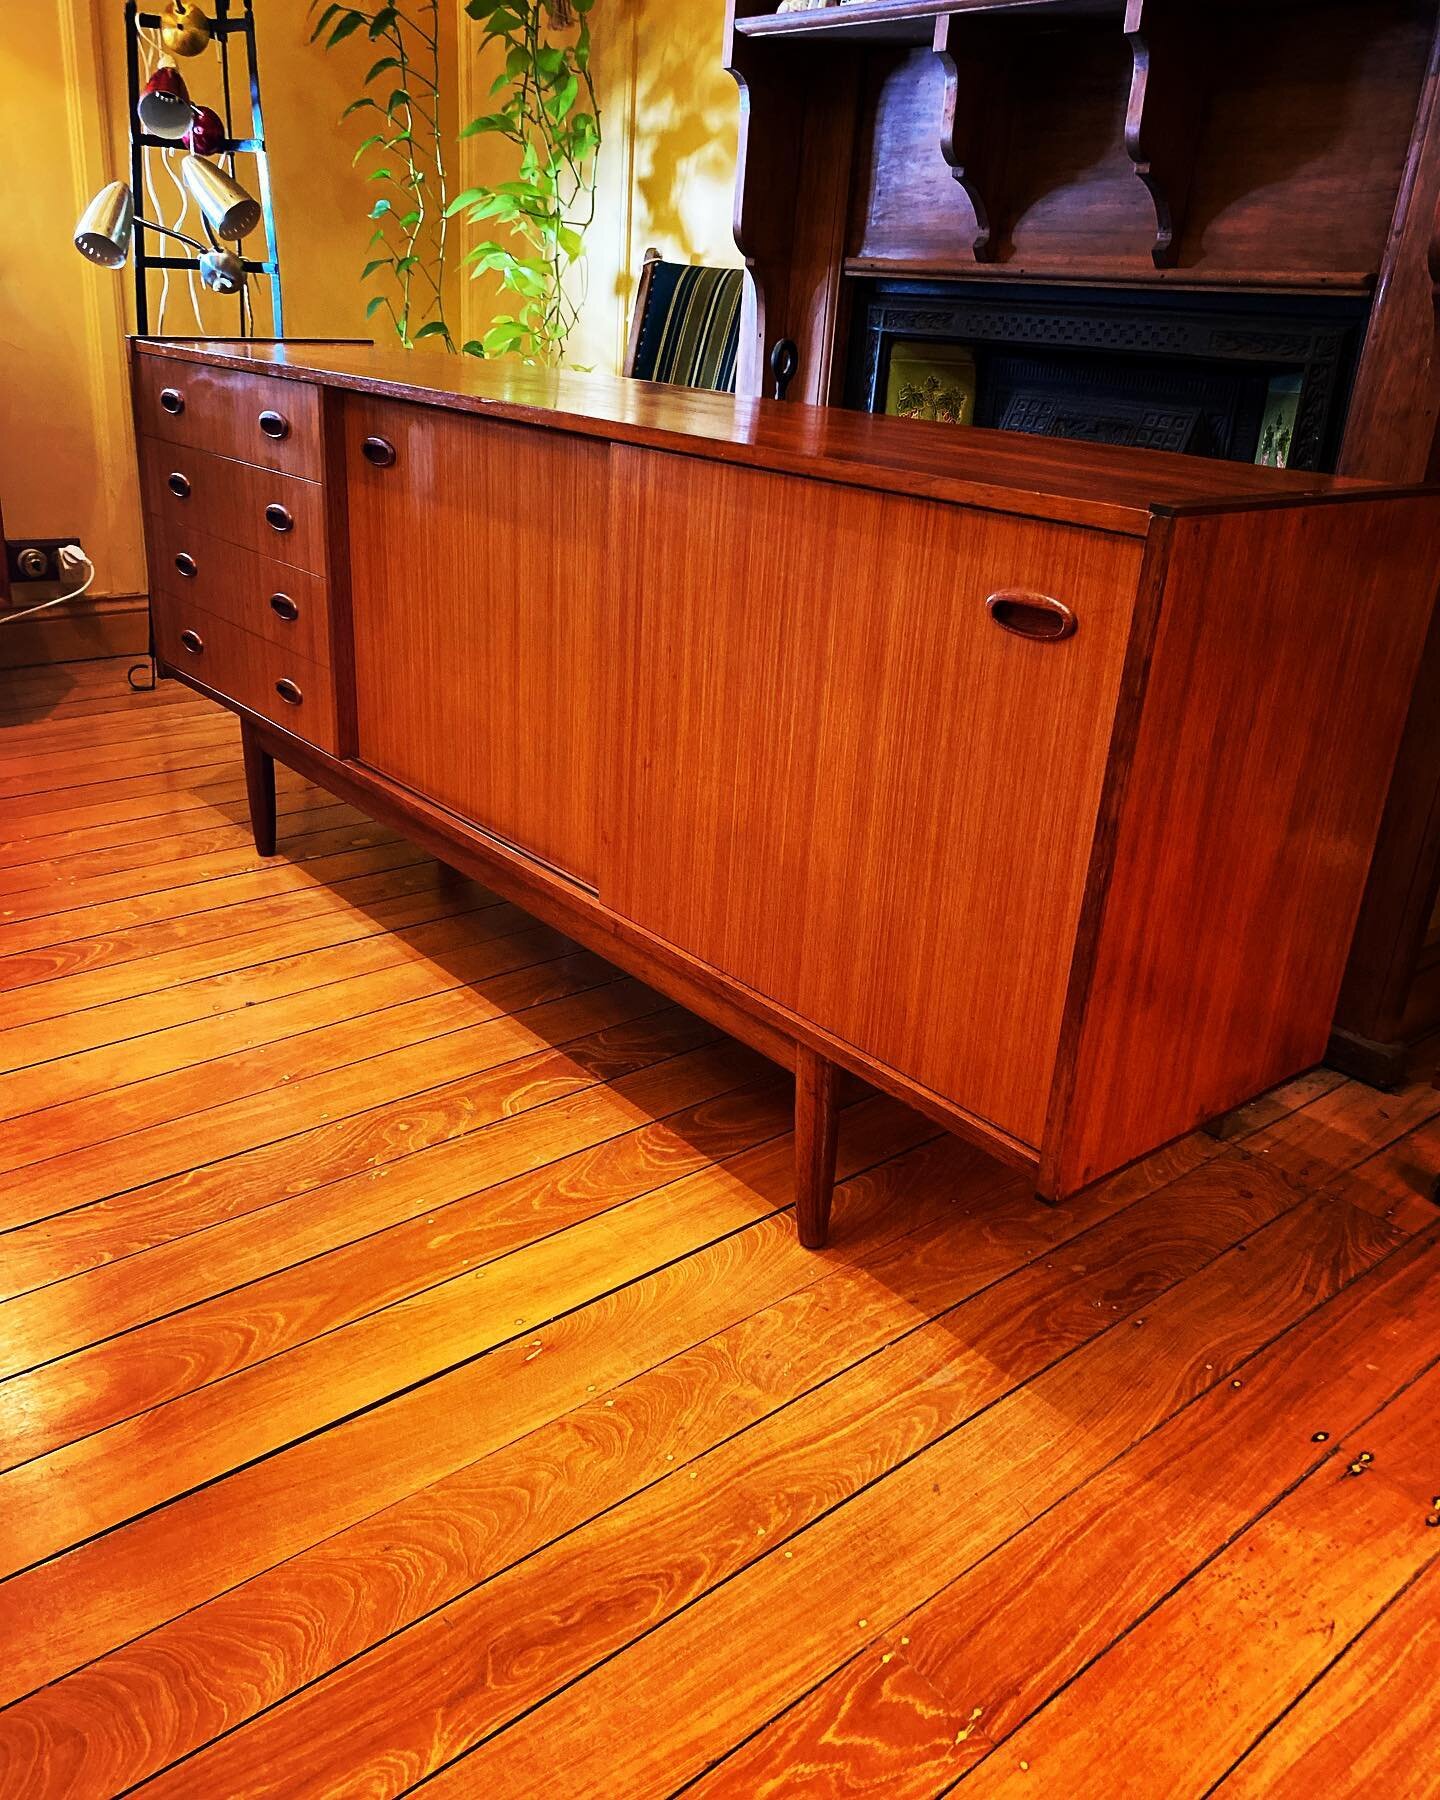 - 1.83m Teak Sideboard

Mid Century Teak Sideboard. 

4 Drawers, felted cutlery drawer, 2 sliding doors with shelves (one adjustable).

183cm long x 40cm deep x 75cm high.

$1,200 in the Uki Showroom now!

DM, call 0477 766 461 or call in to the Show